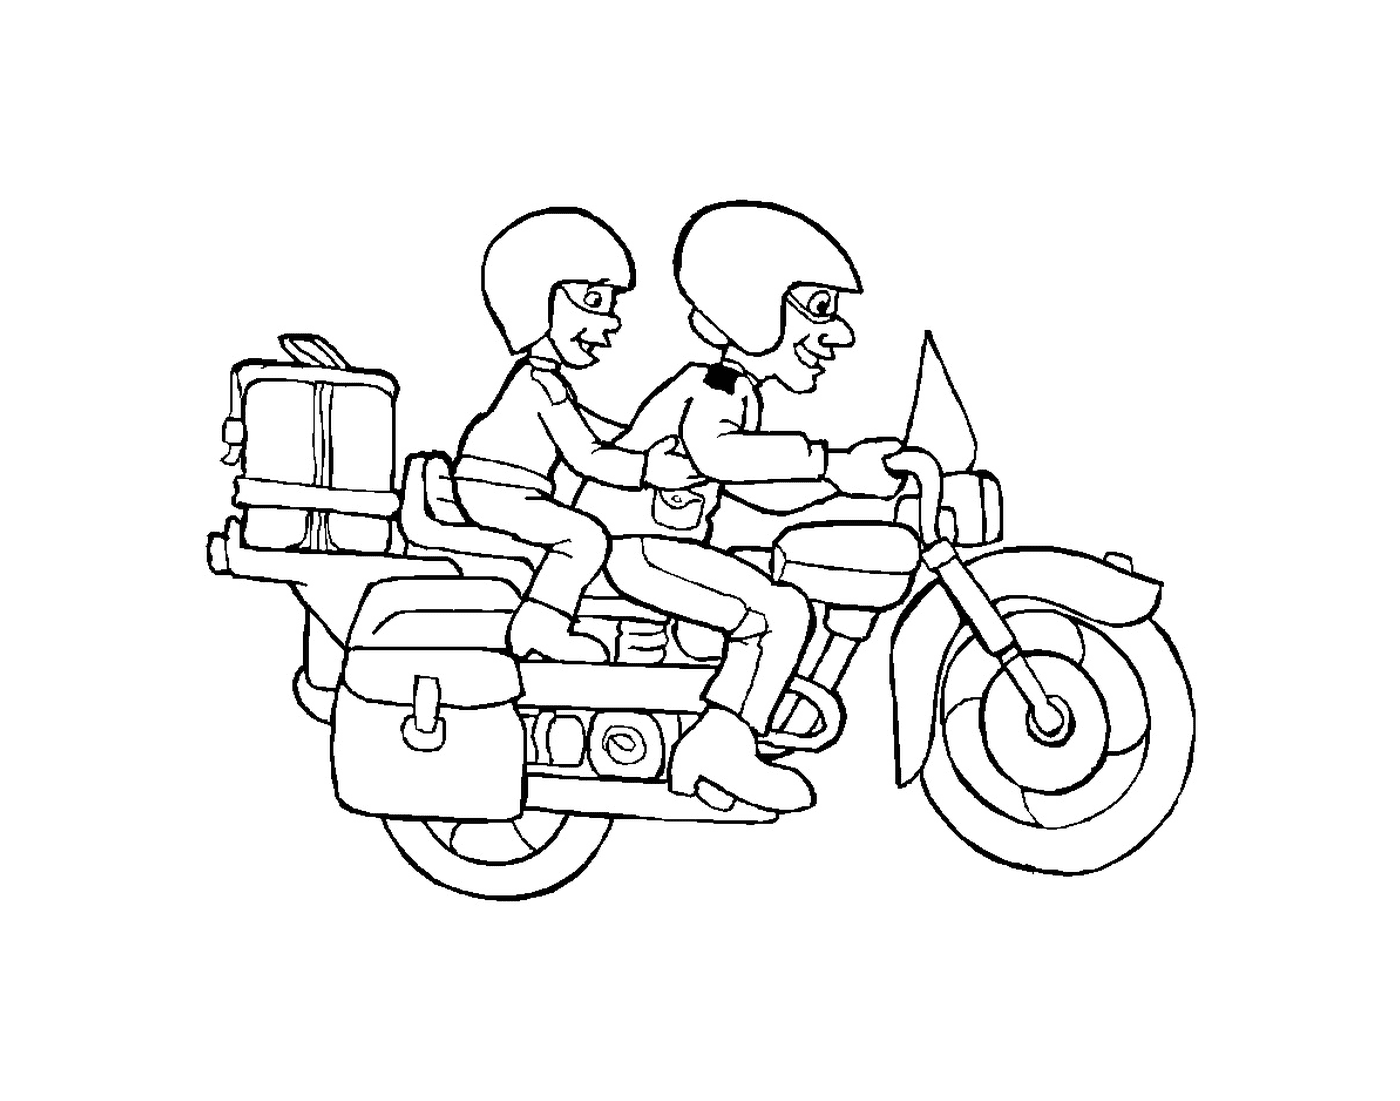  Two people on a motorcycle 